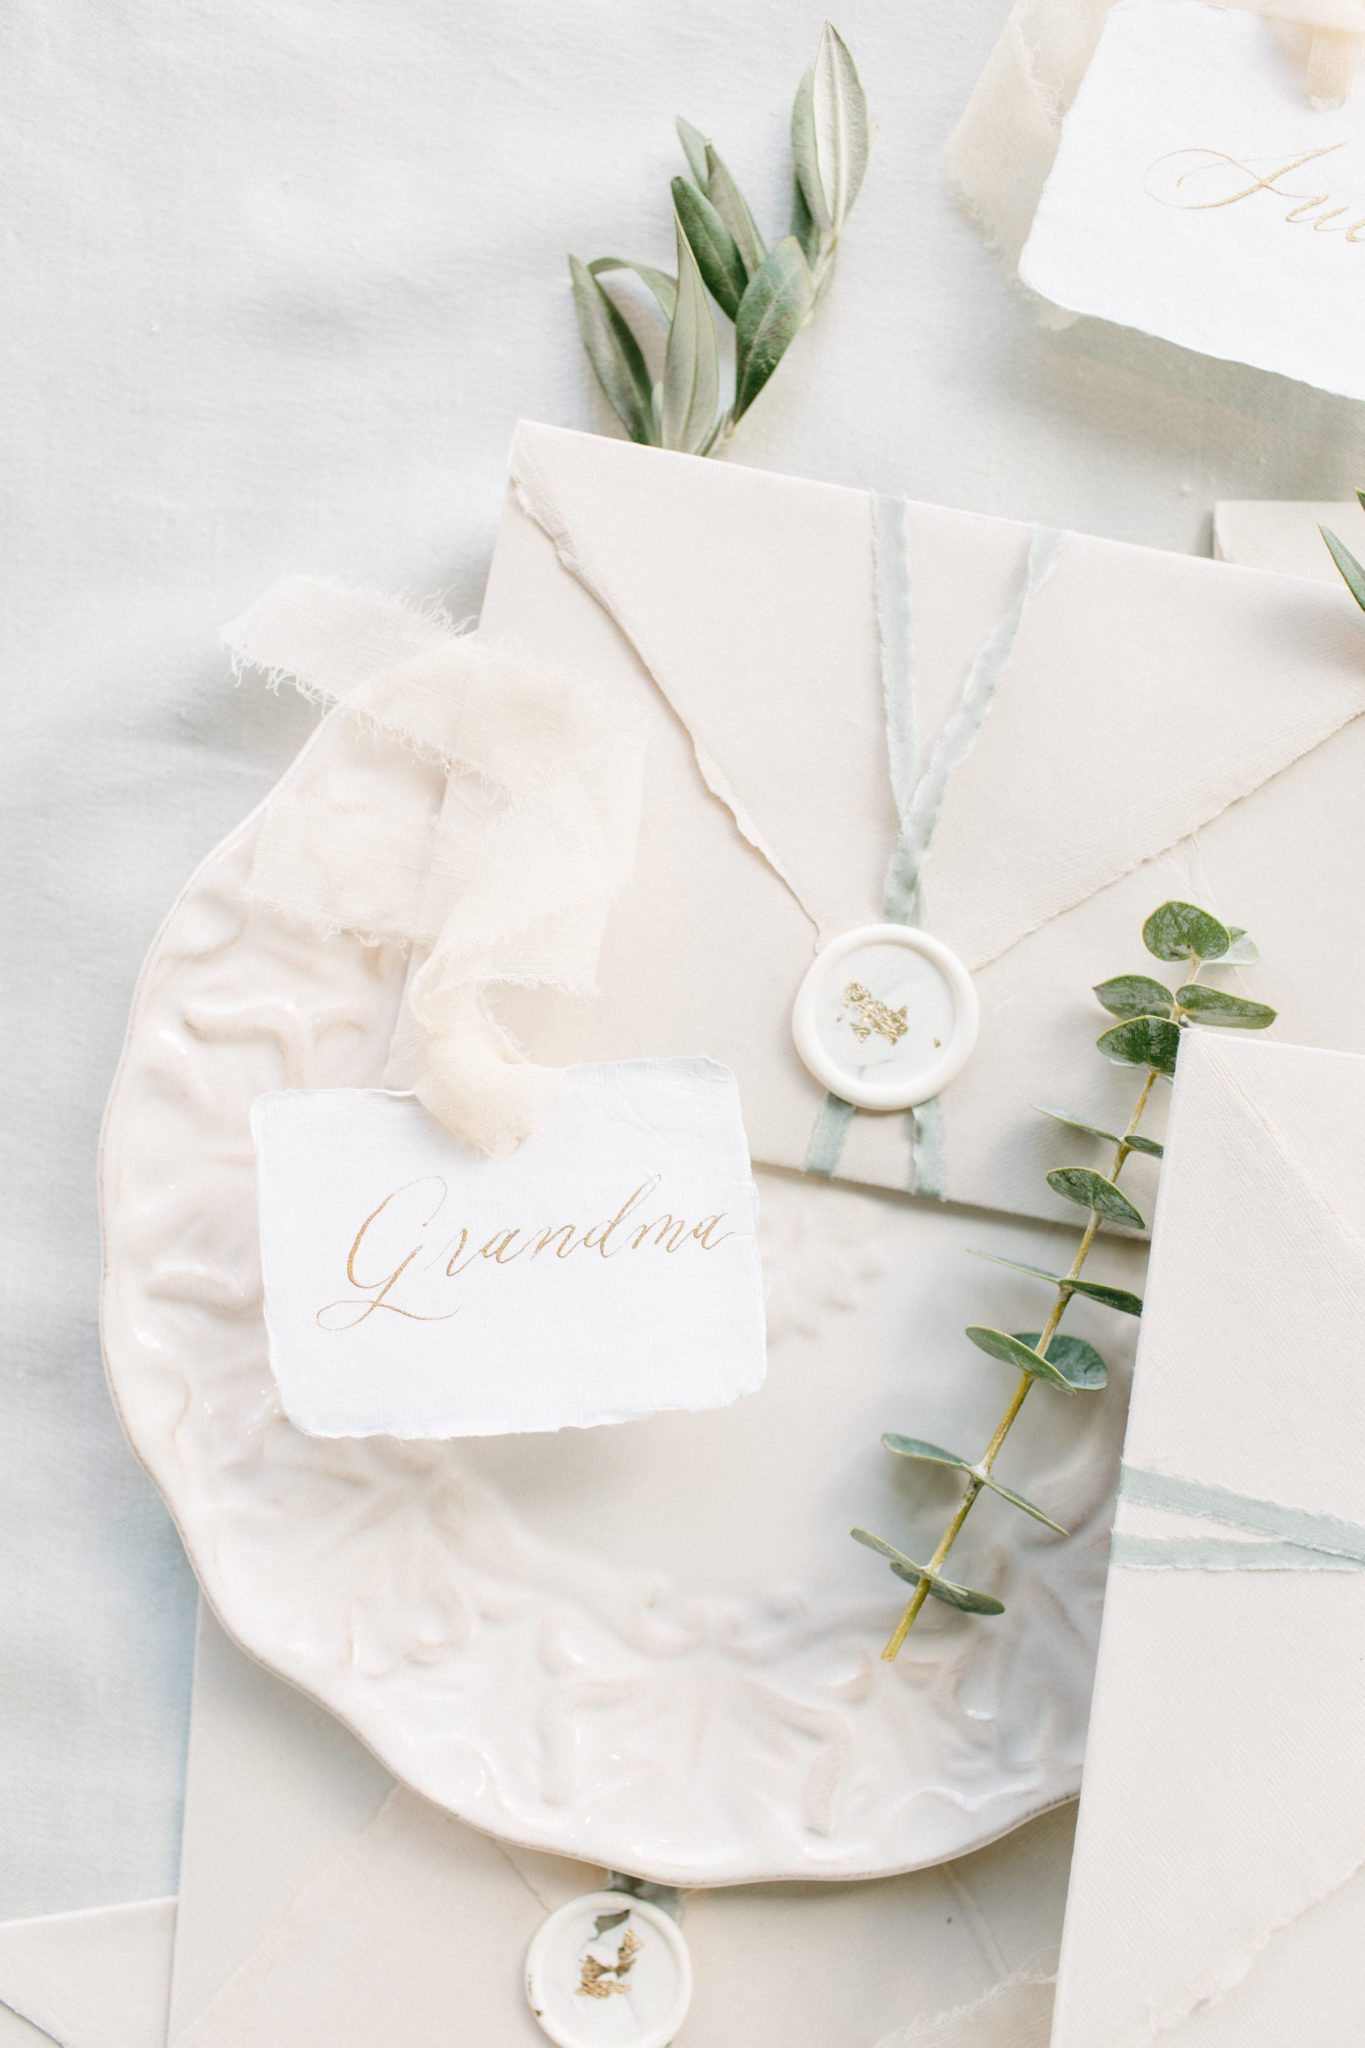 Wedding stationery with green accents at Canmore intimate wedding.